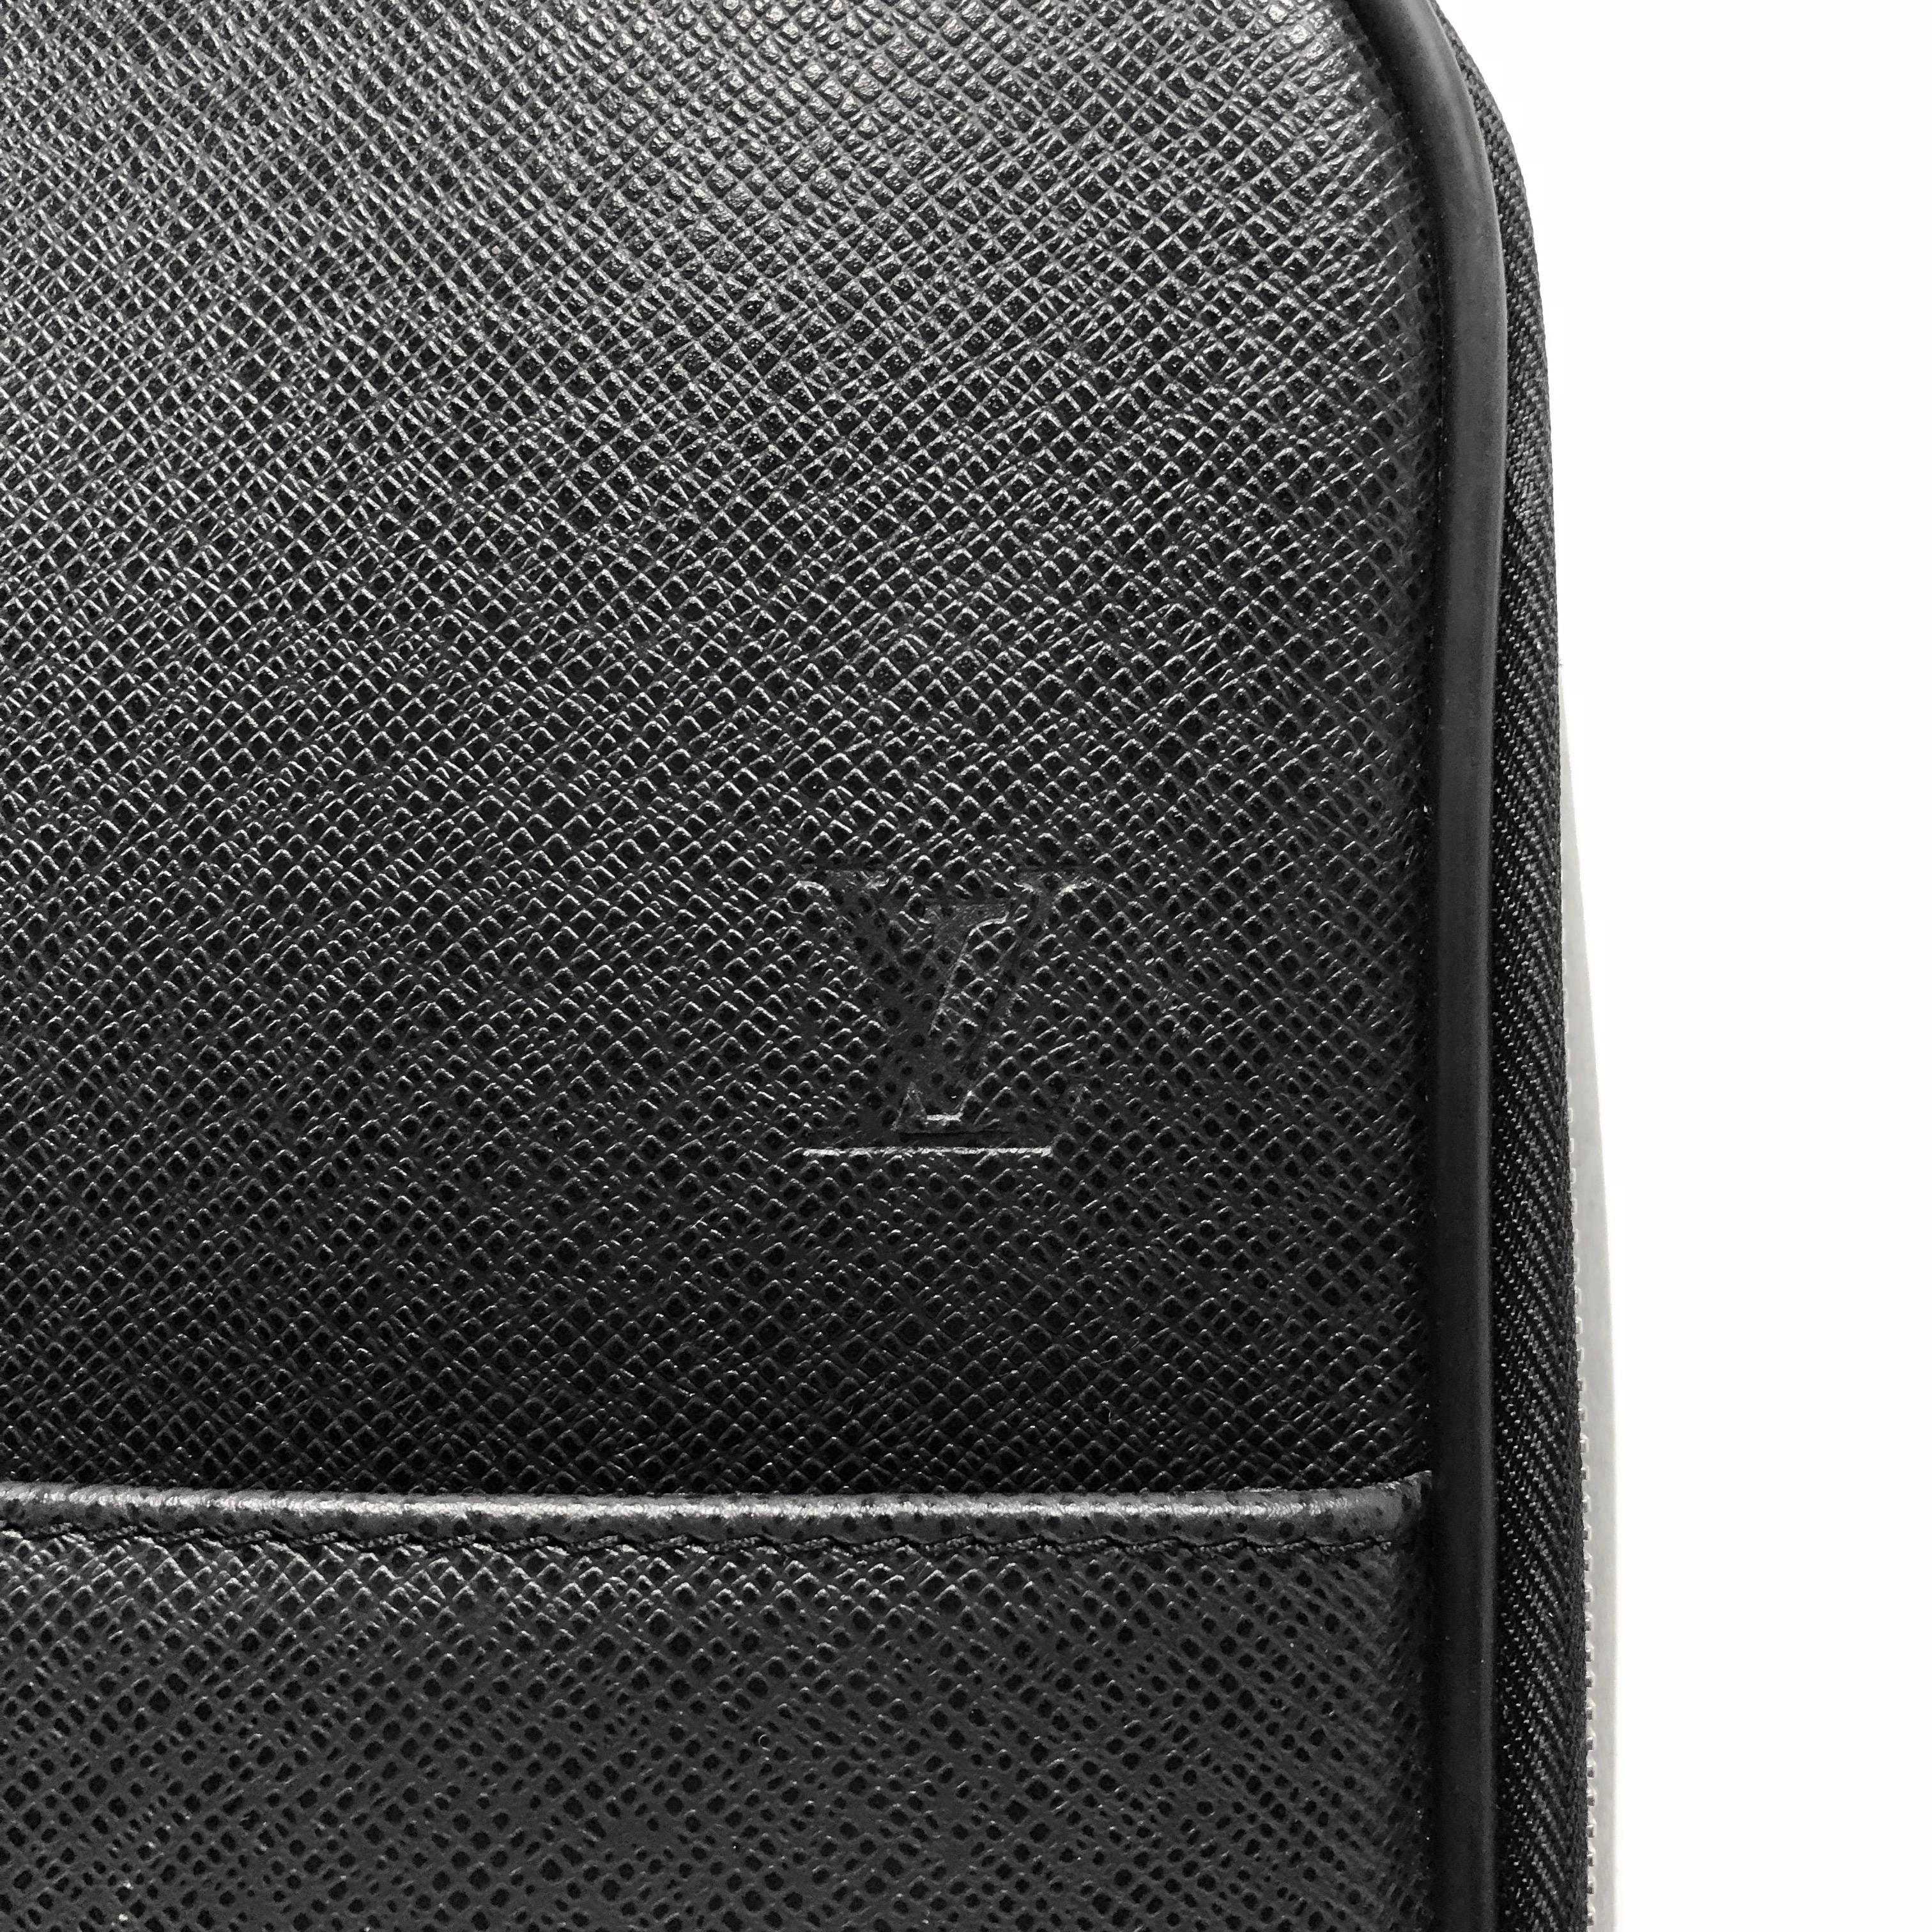 Louis Vuitton dark grey taiga leather Pegase 45 with silver-tone hardware, flat pocket at front, retractable pull handle, wrap around zipper. The interior primary compartment is lined with a durable black nylon and pockets, and a removable pouch.